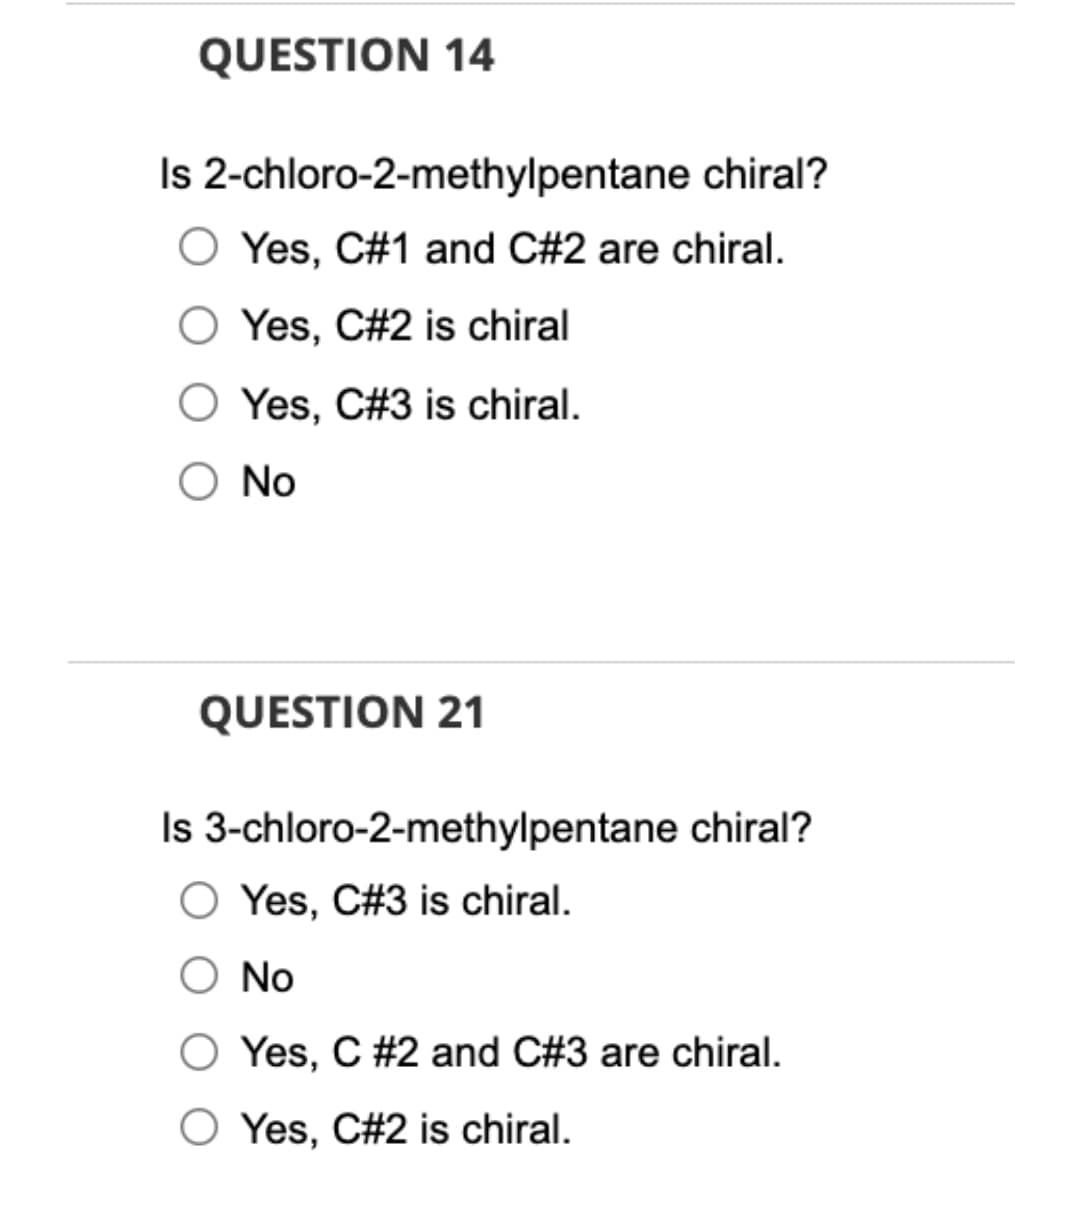 QUESTION 14
Is 2-chloro-2-methylpentane chiral?
O Yes, C#1 and C#2 are chiral.
Yes, C#2 is chiral
Yes, C#3 is chiral.
Ο No
QUESTION 21
Is 3-chloro-2-methylpentane chiral?
O Yes, C#3 is chiral.
No
Yes, C #2 and C#3 are chiral.
O Yes, C#2 is chiral.